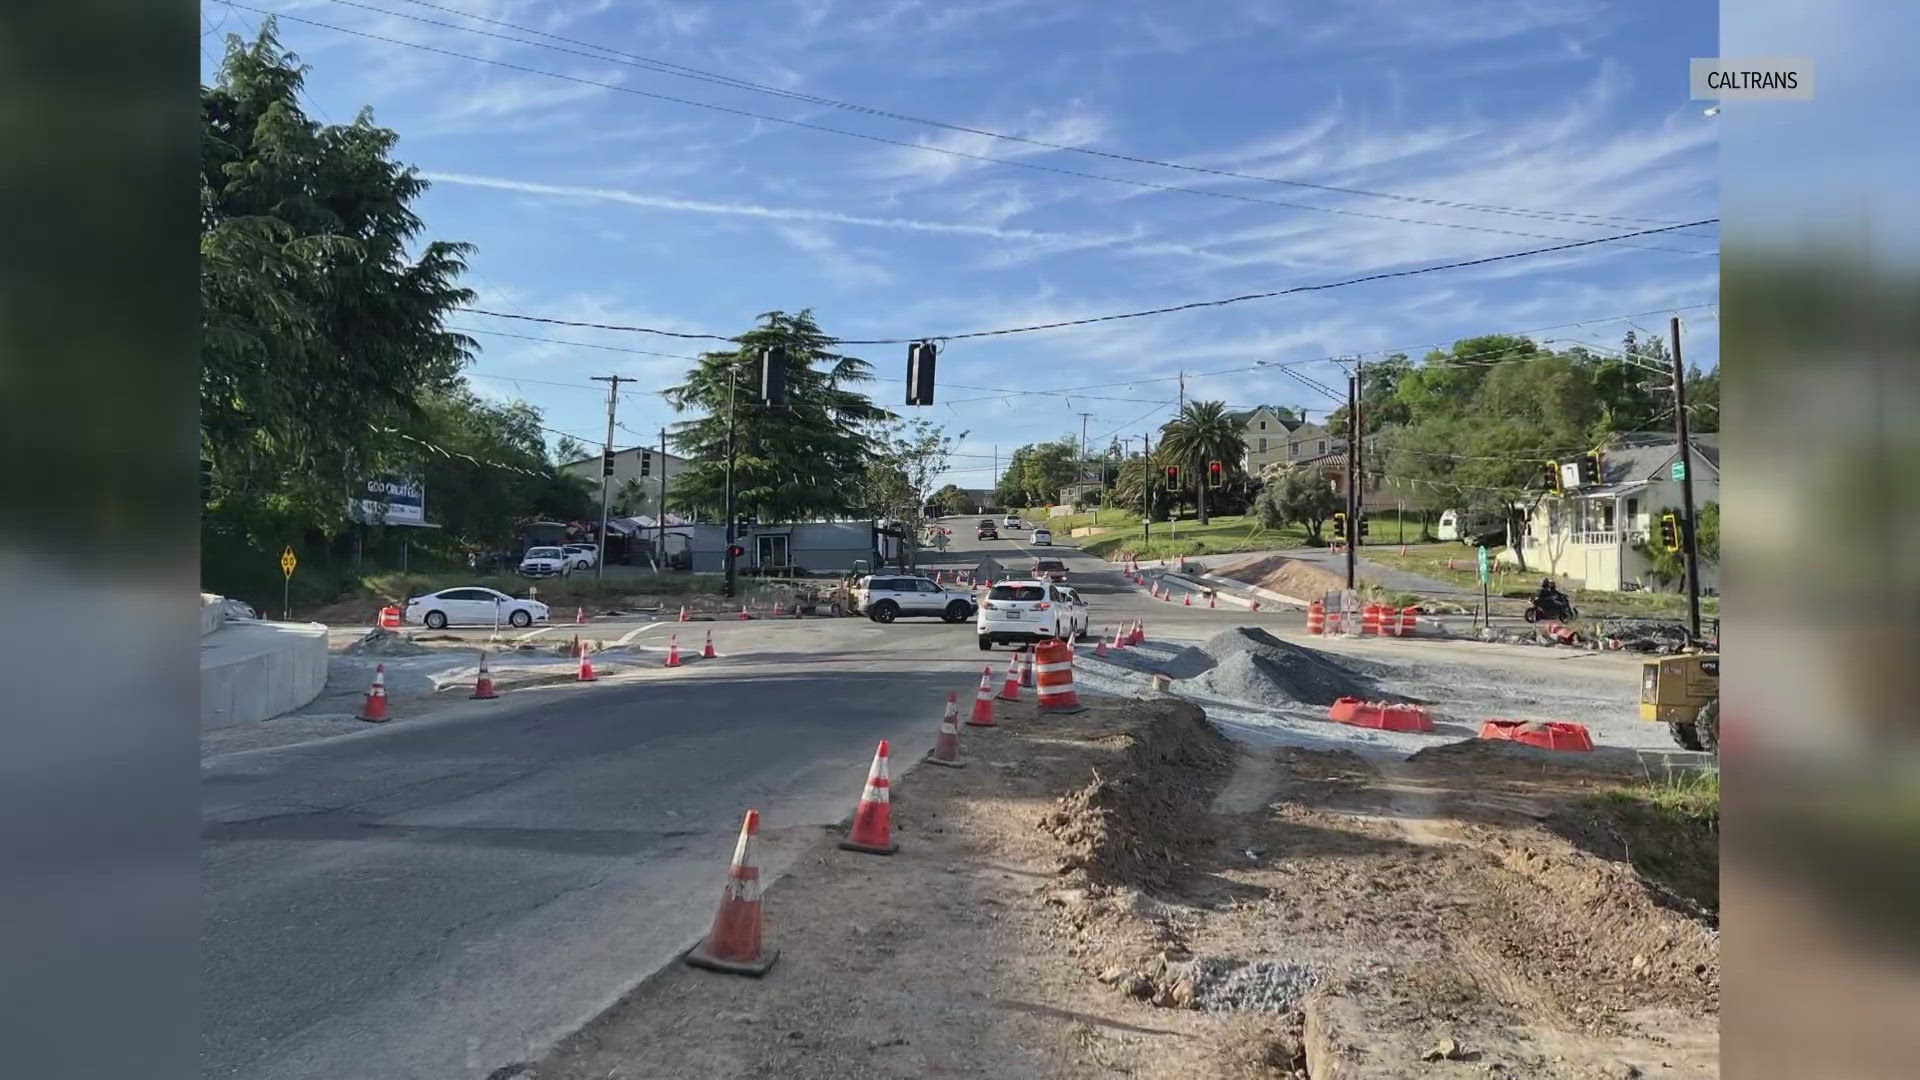 The closure is due to the $9.9 million American Canyon Roundabout Project.